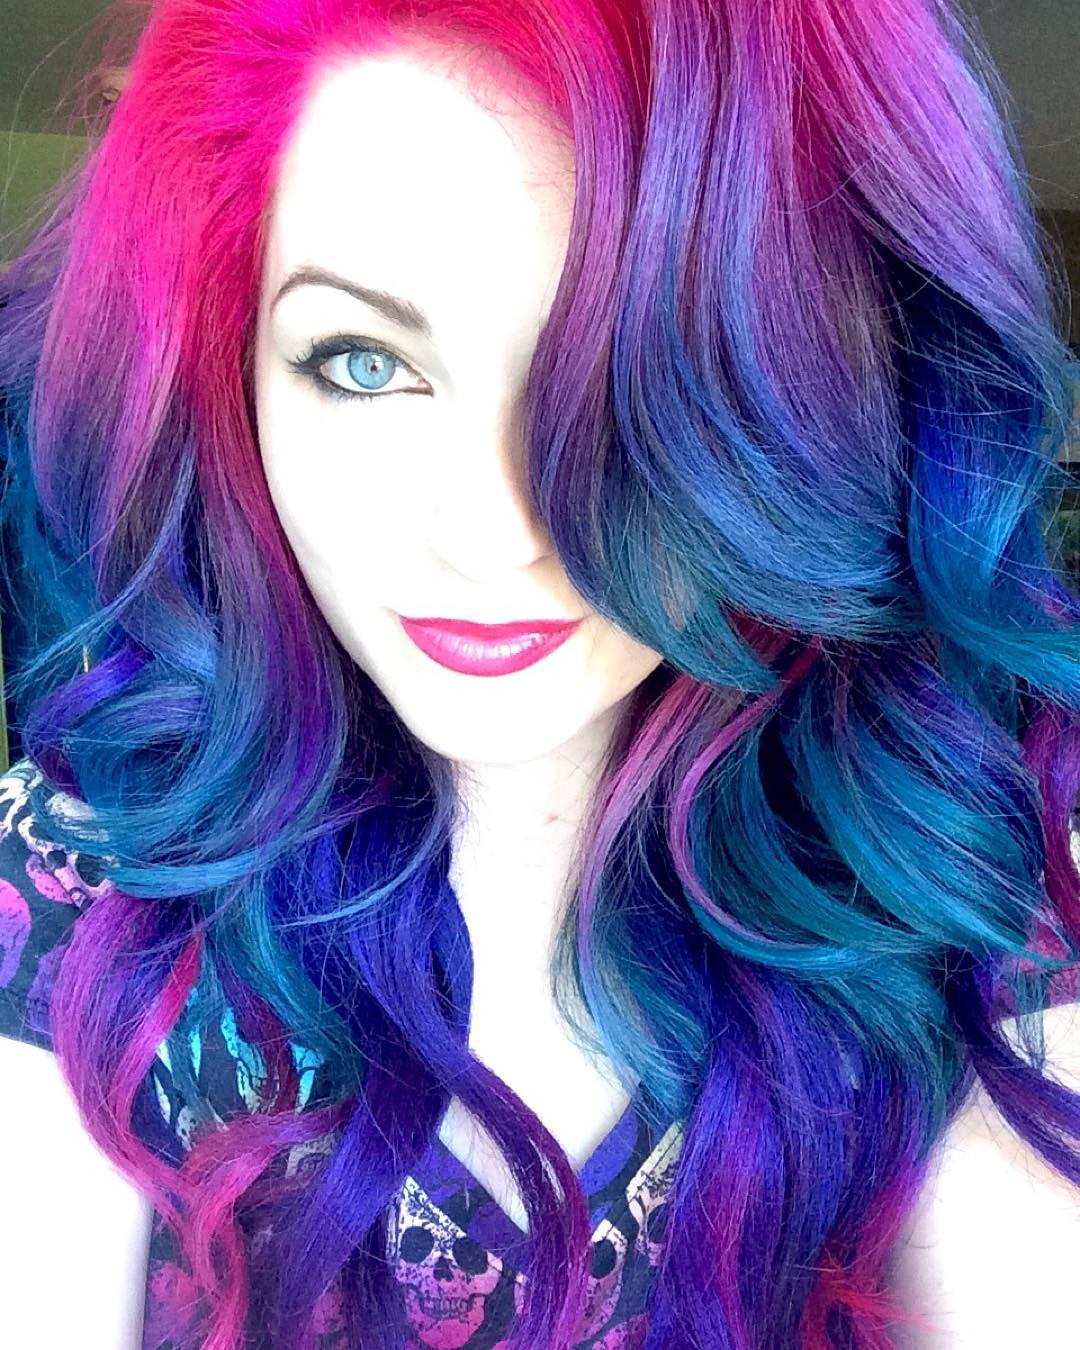 Hairstylist Reveals The Truth Behind Other People's Selfies